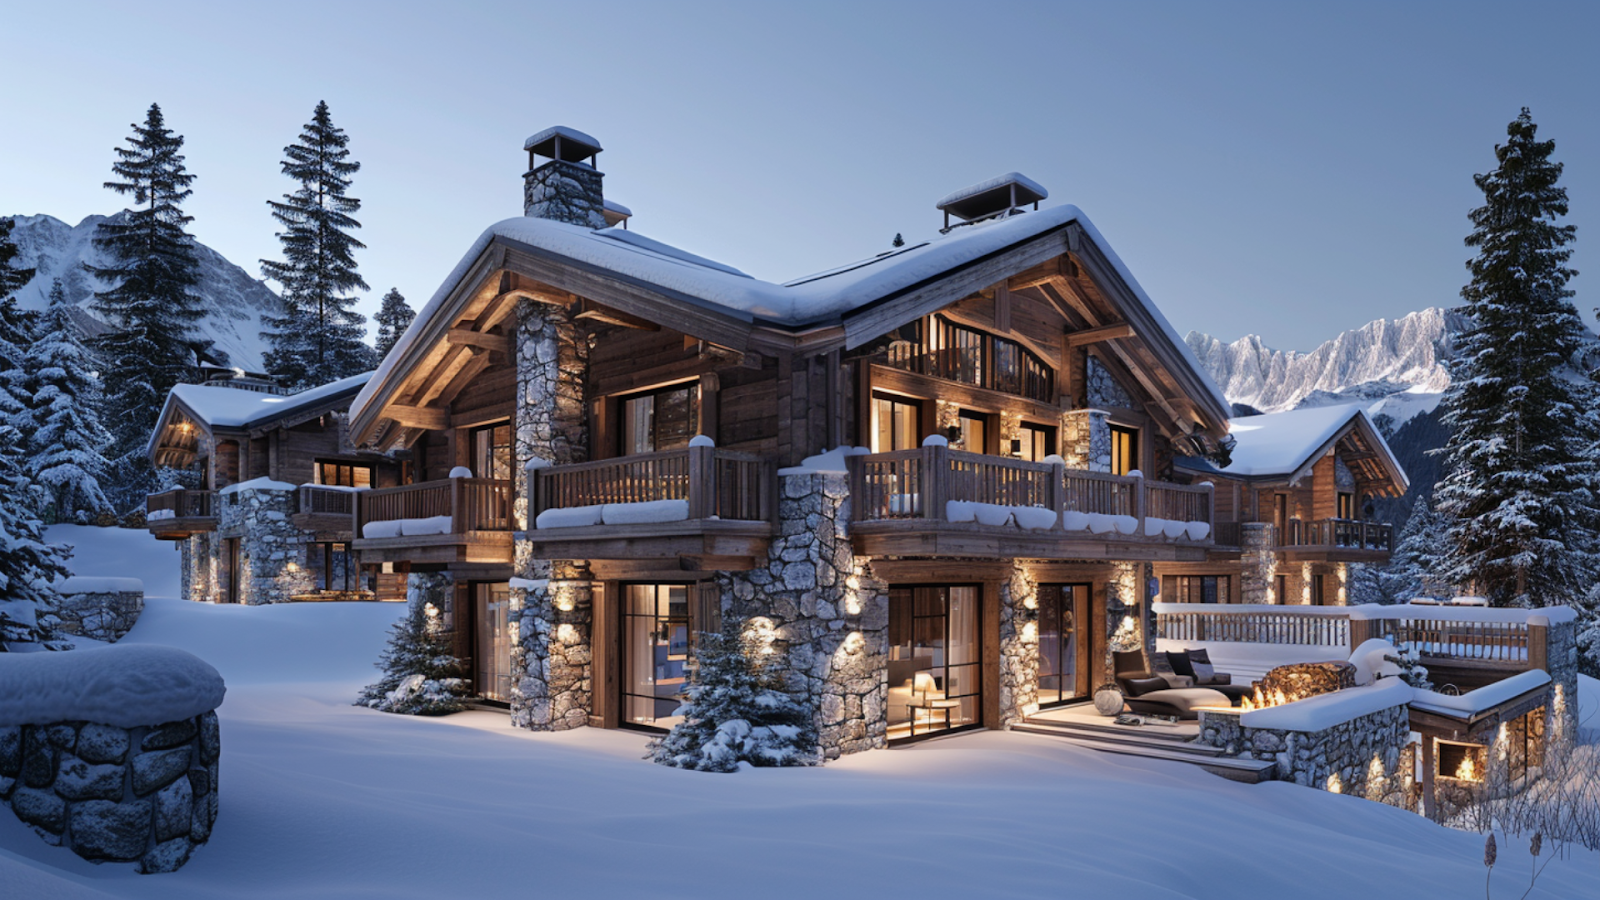 A spacious, luxury vacation rental in Courchevel, France covered with snow